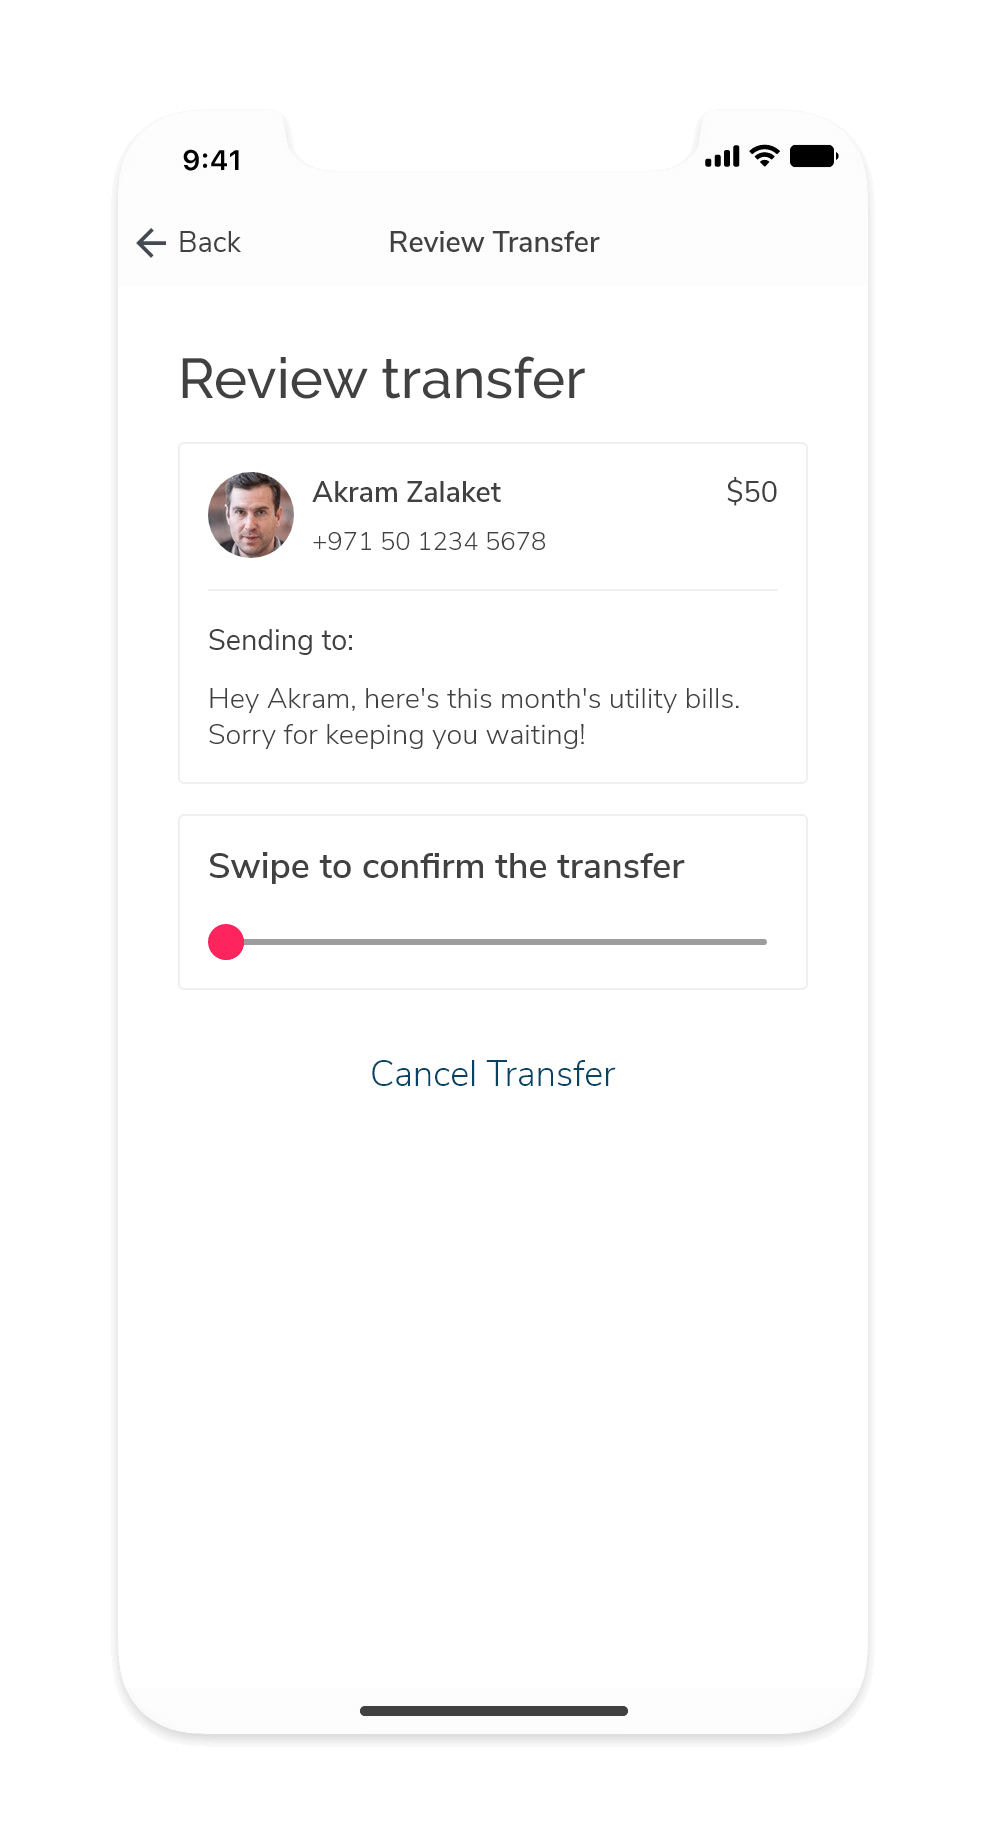 Screenshot of the review transfer page where a user is prompted to swipe to confirm his transfer.